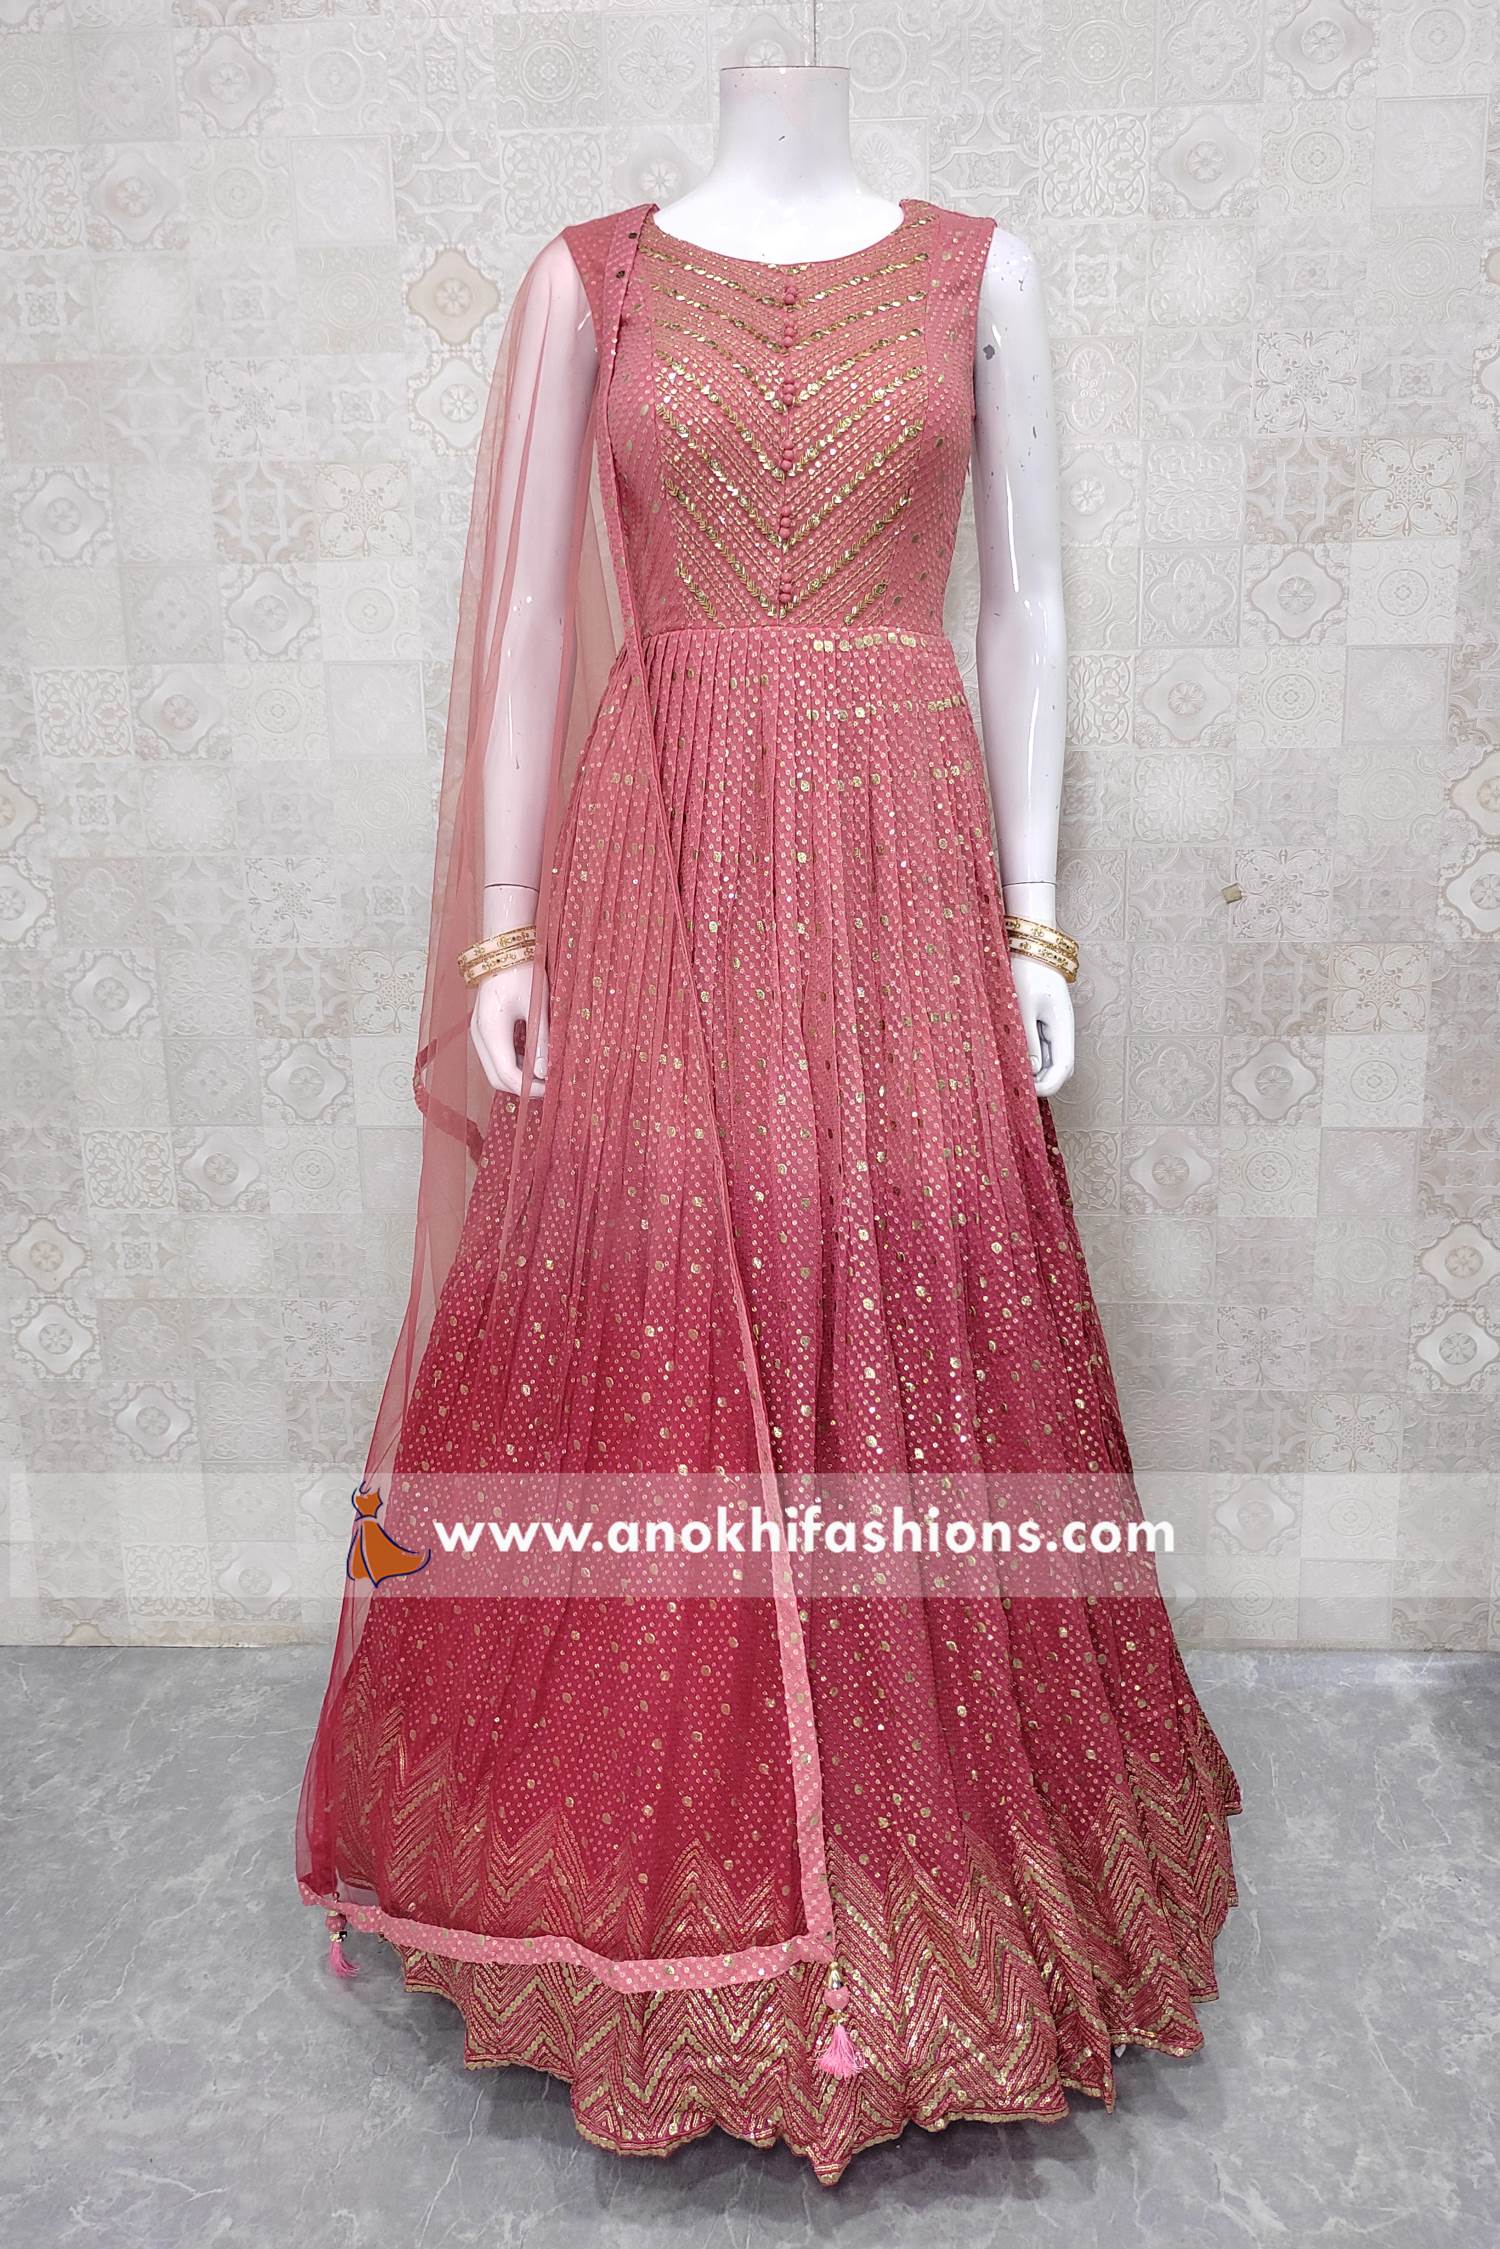 Peach Color Gown With Golden Tassel Detailing - Roop Square